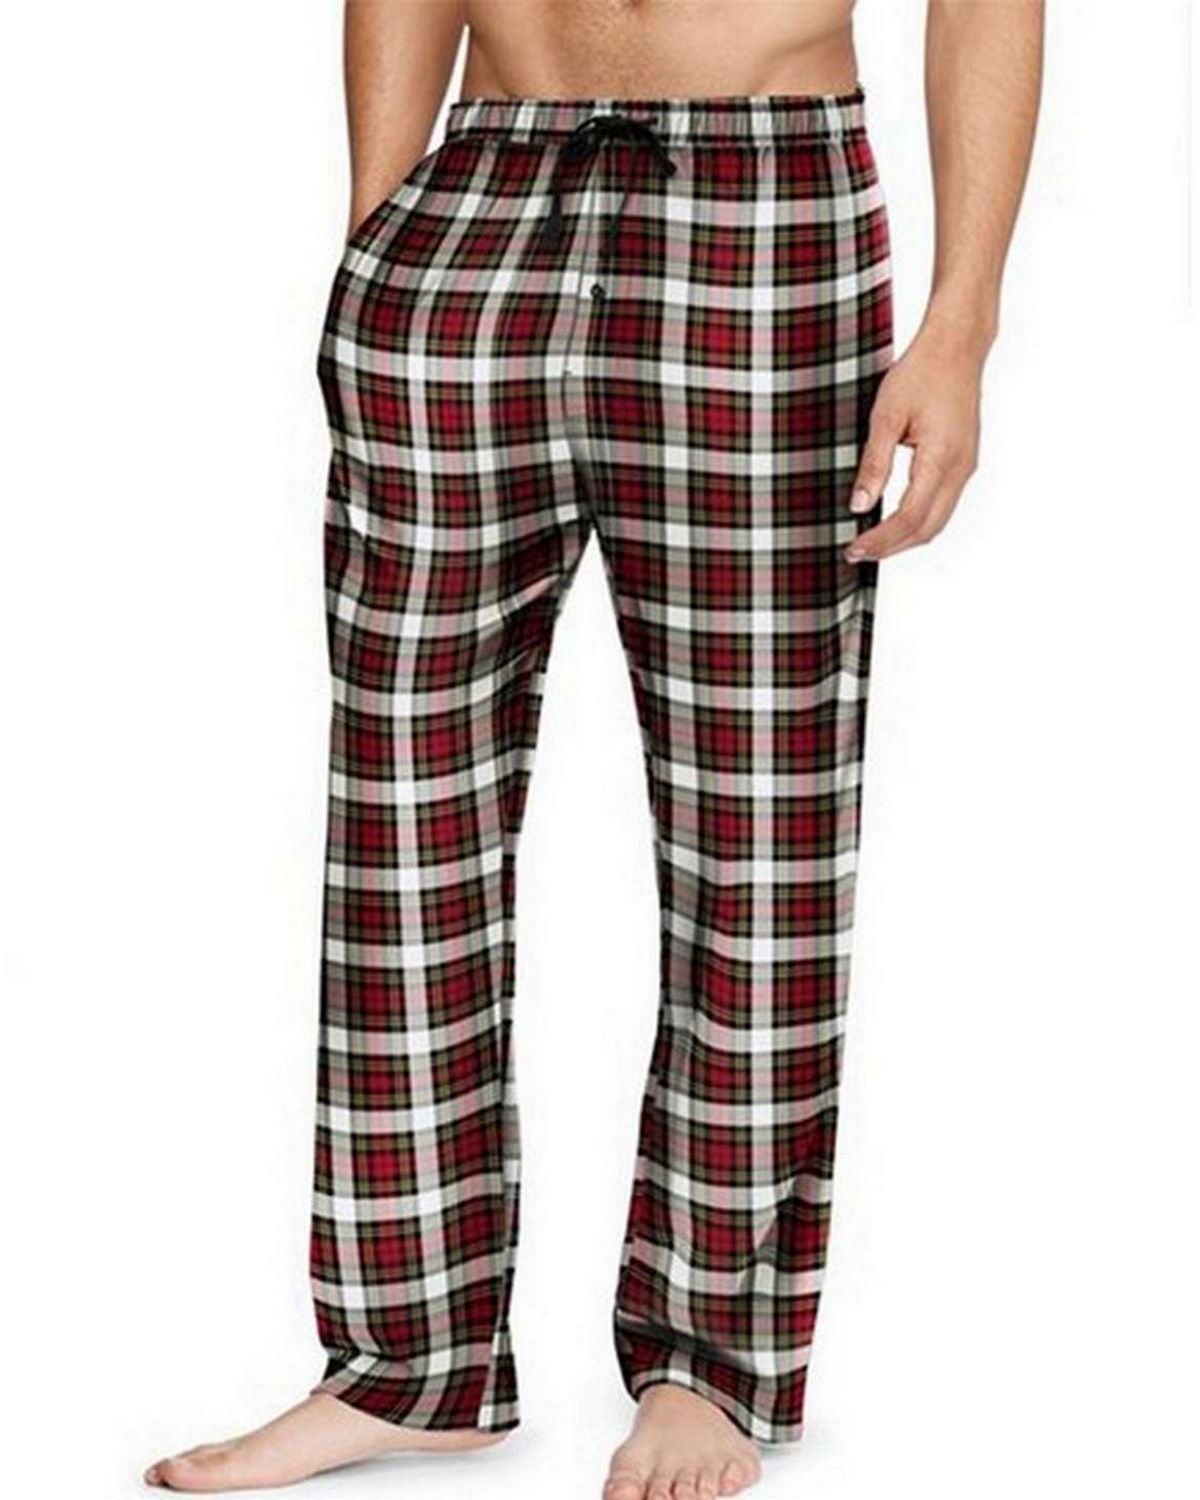 Hanes 02006 Mens Flannel Pants with Comfort Flex Waistband